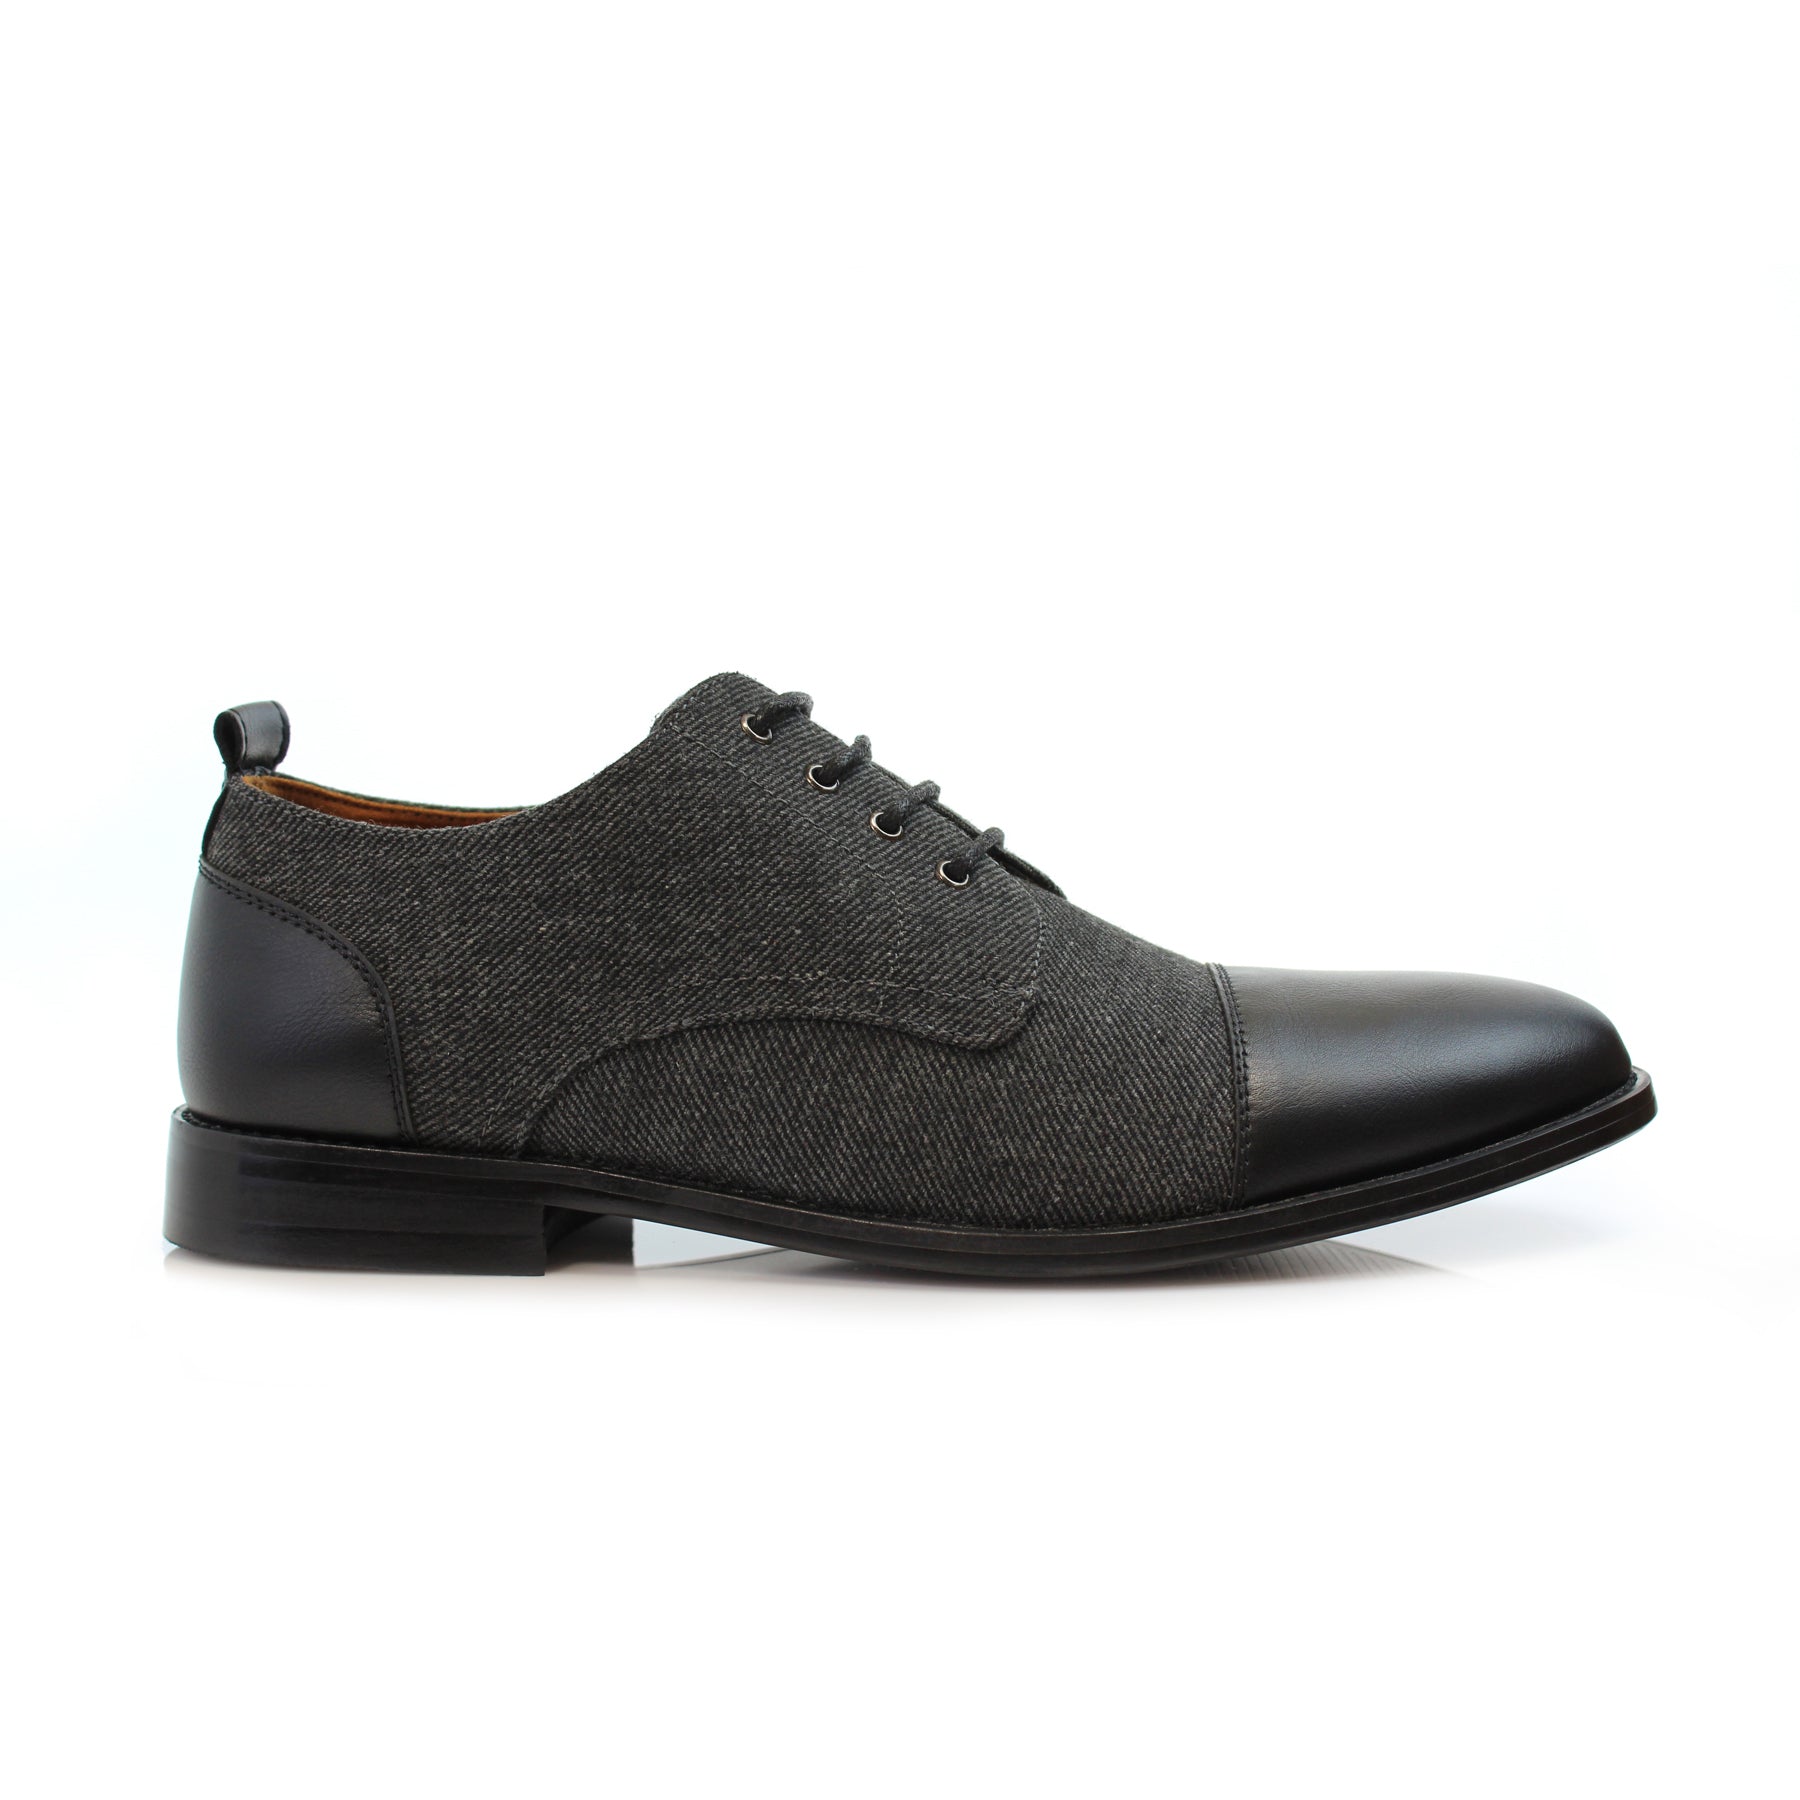 Duo-textured Woolen Derby Dress Shoes | Clifford by Polar Fox | Conal Footwear | Outer Side Angle View